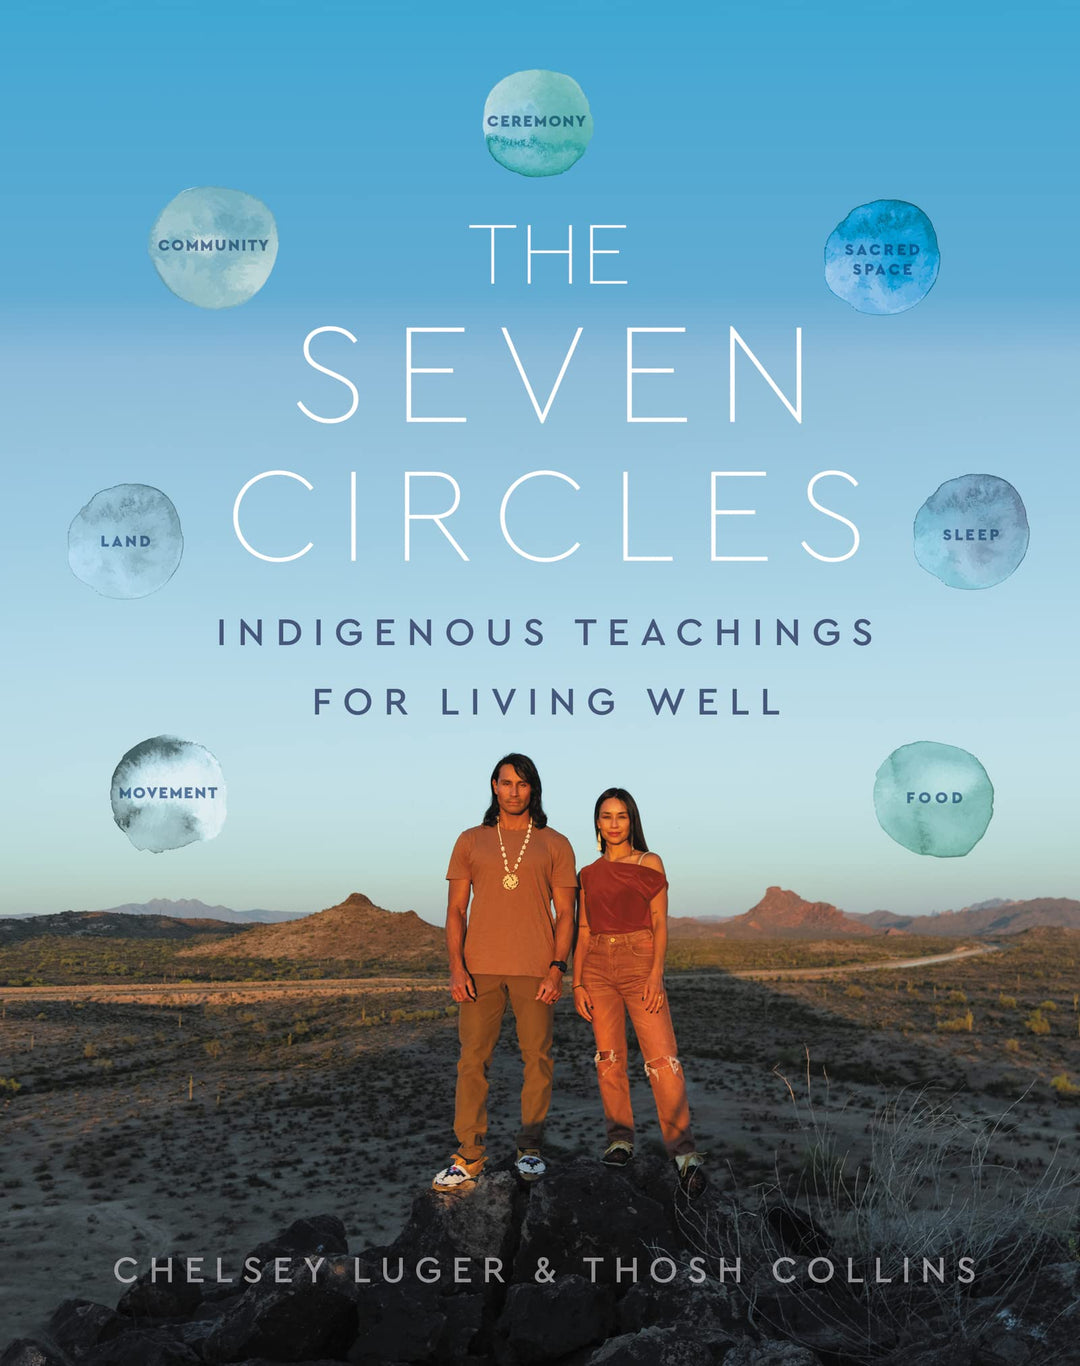 The Seven Circles: Indigenous Teachings for Living Well by Chelsey Luger & Thosh Collins